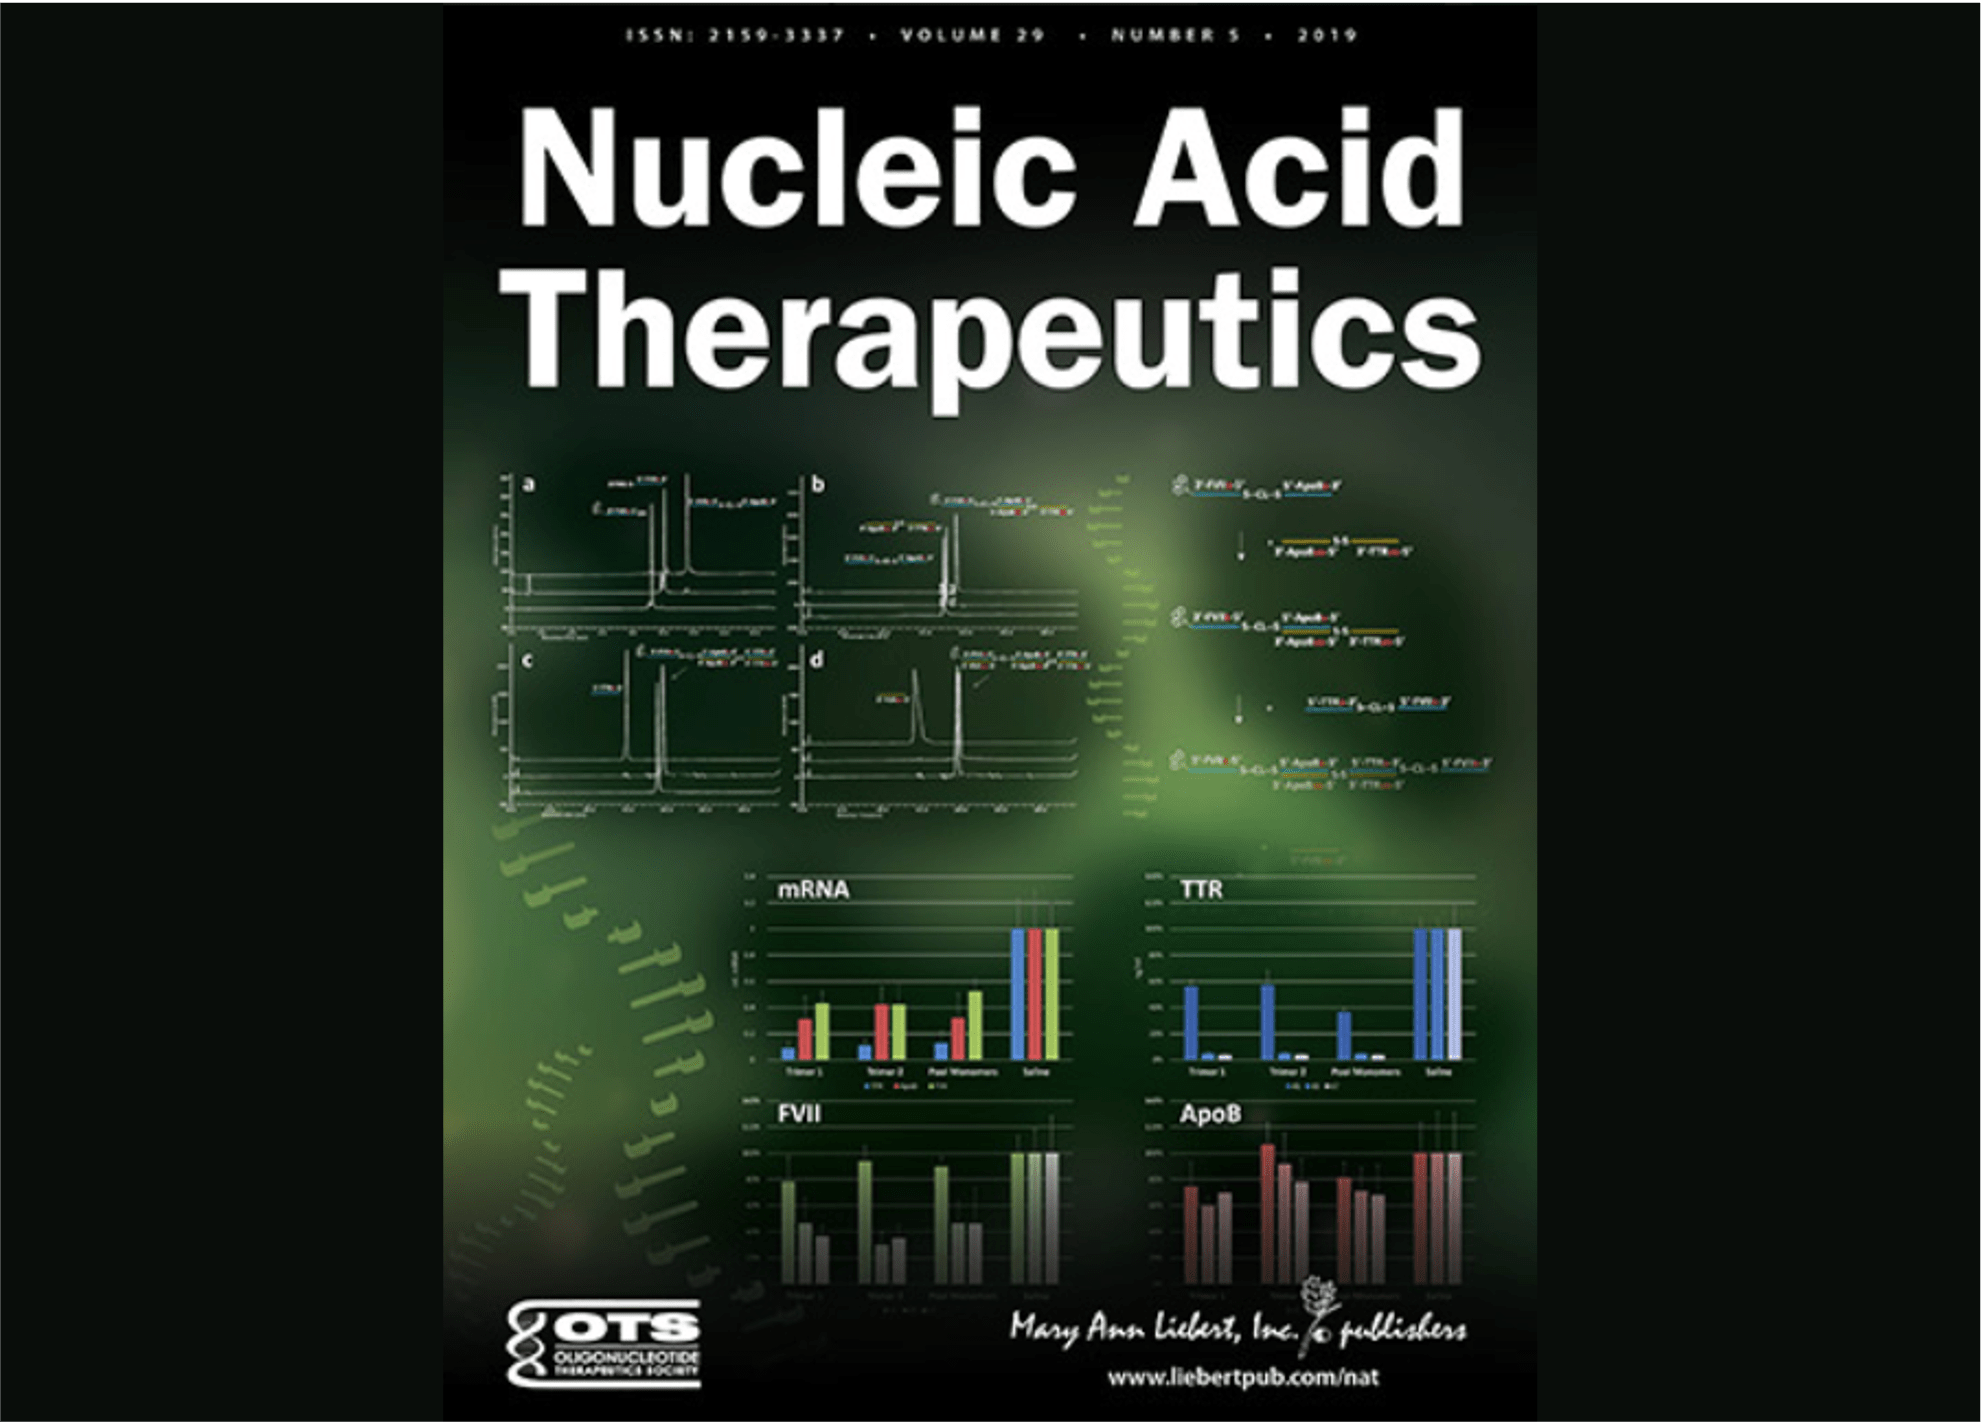 MPEG LA Announces Peer Reviewed Article Featured in Nucleic Acid Therapeutics